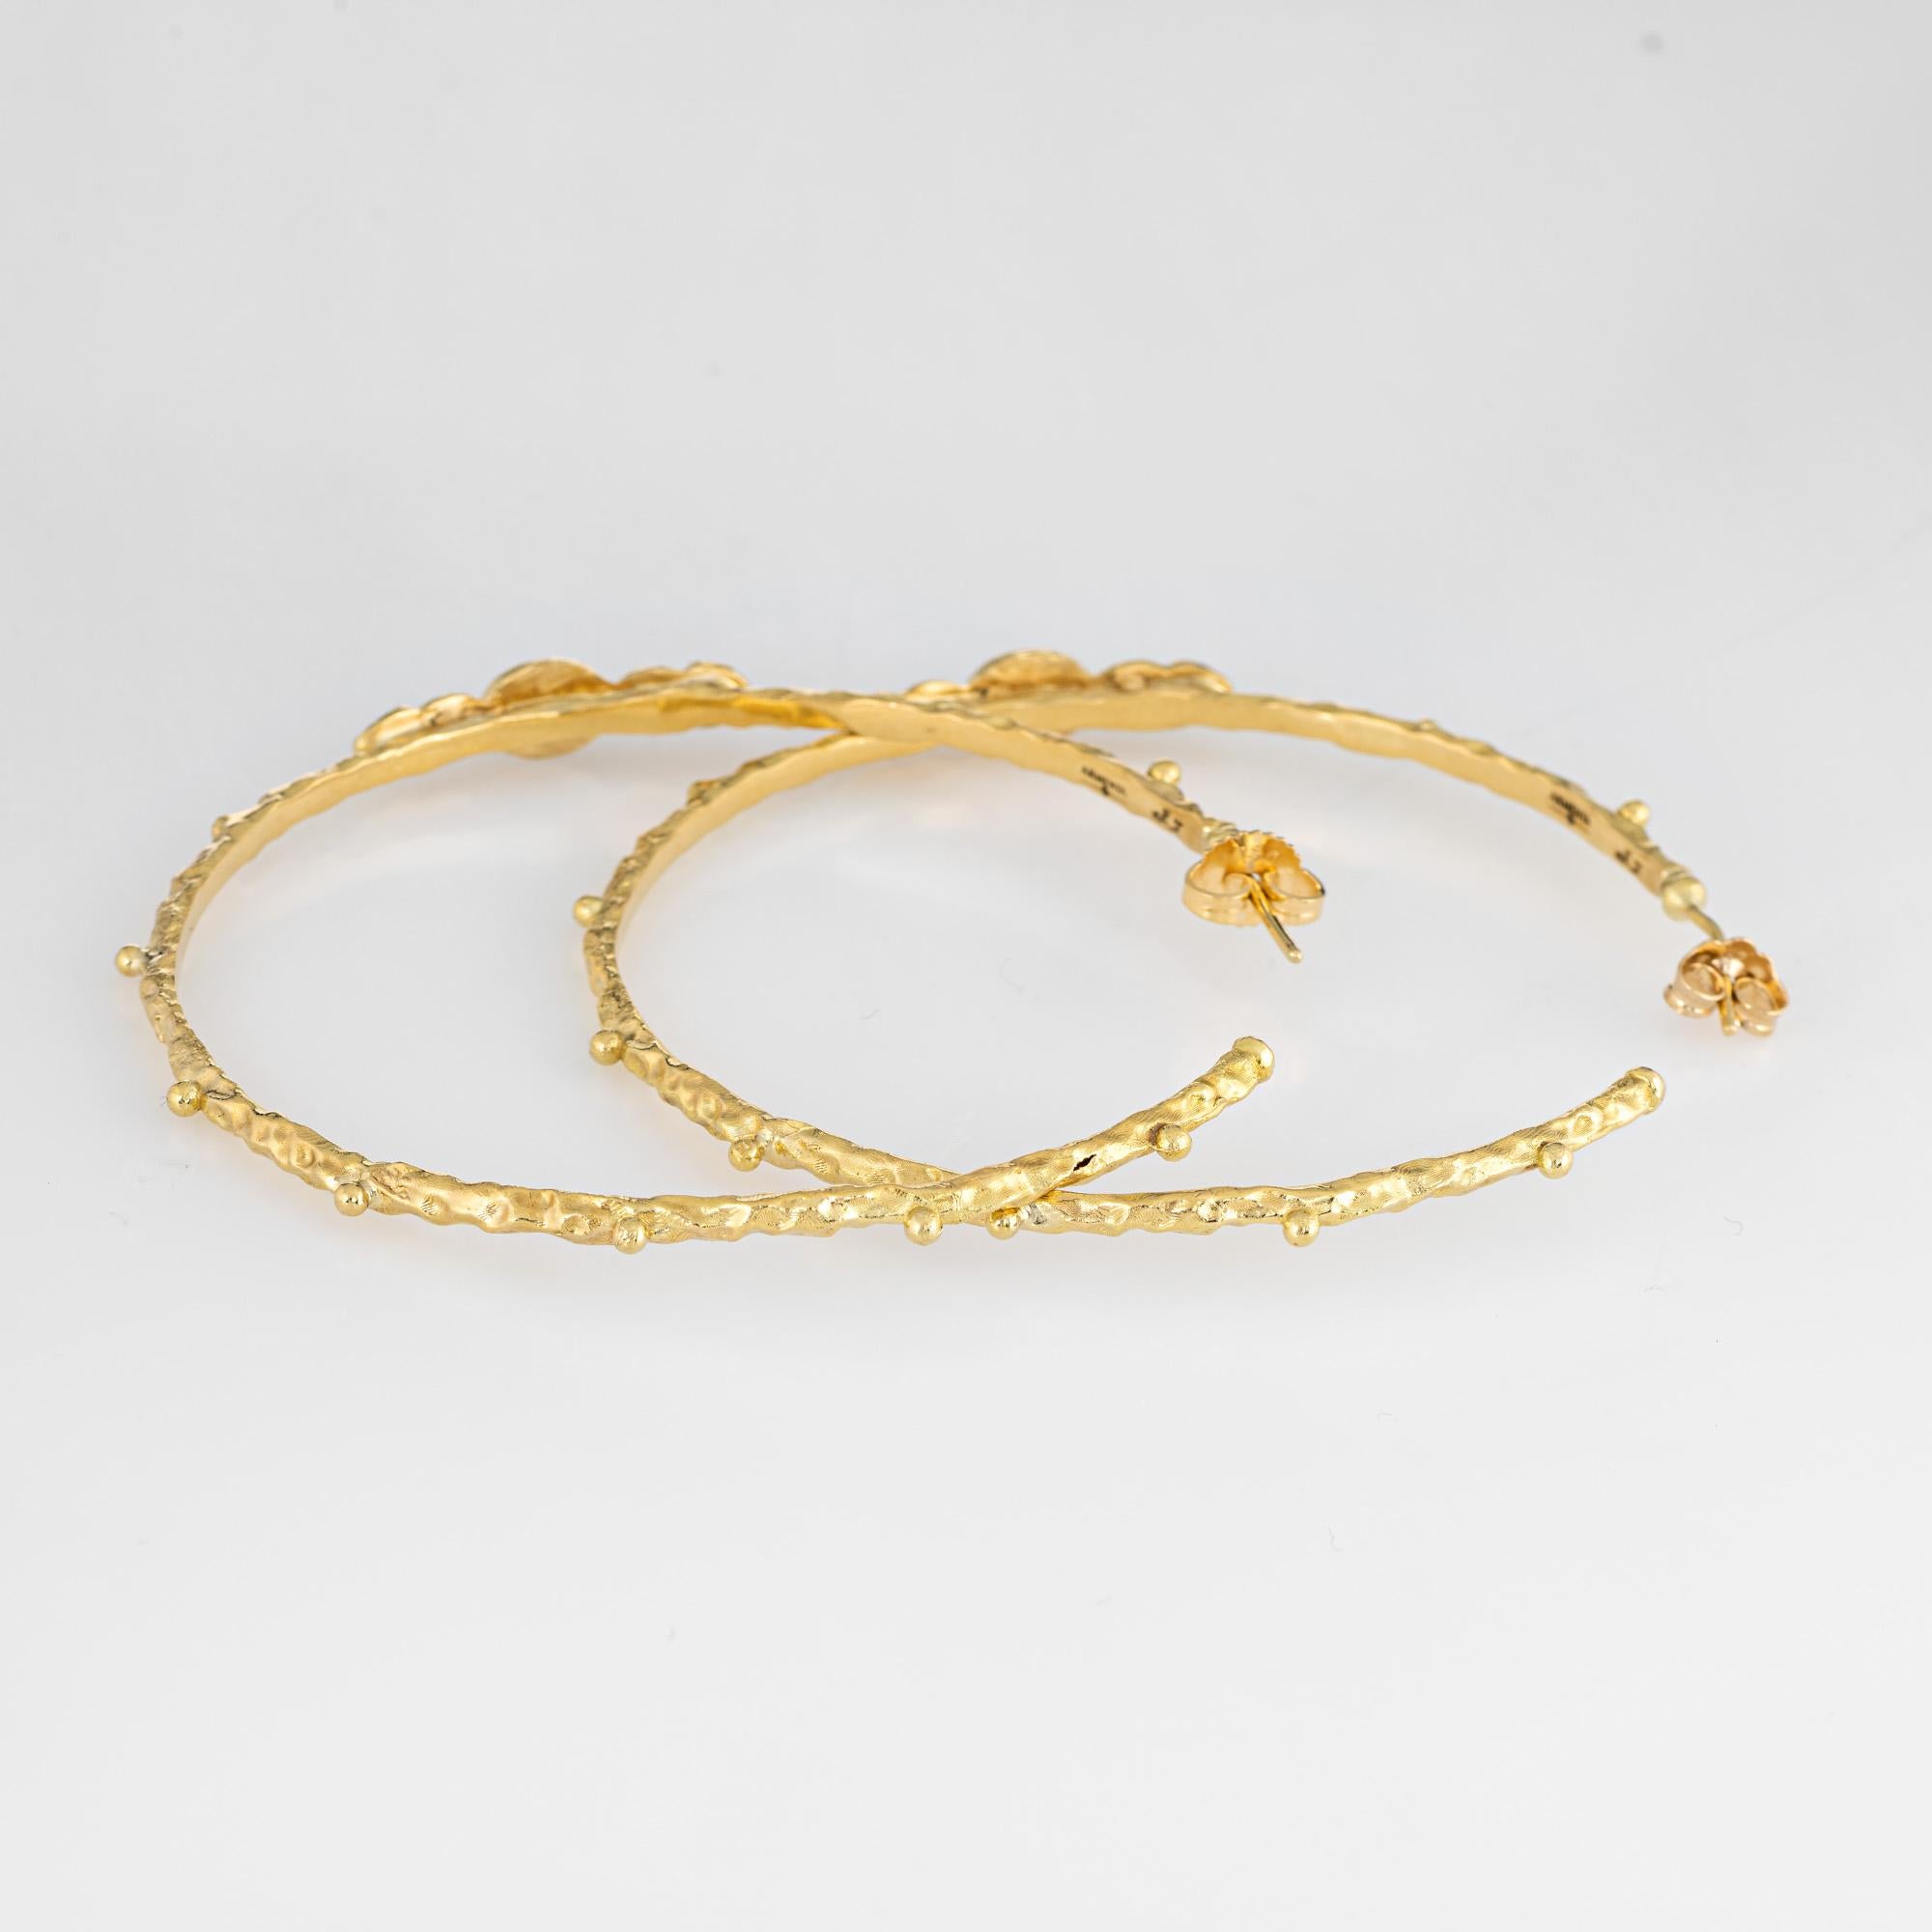 Elegant pair of Armenta large hoop earrings crafted in 18k yellow gold. 

Opals each measure 5mm x 4mm accented with white sapphires estimated at 0.32 carats (total estimated weight). The opals are in excellent condition and free of cracks or chips.